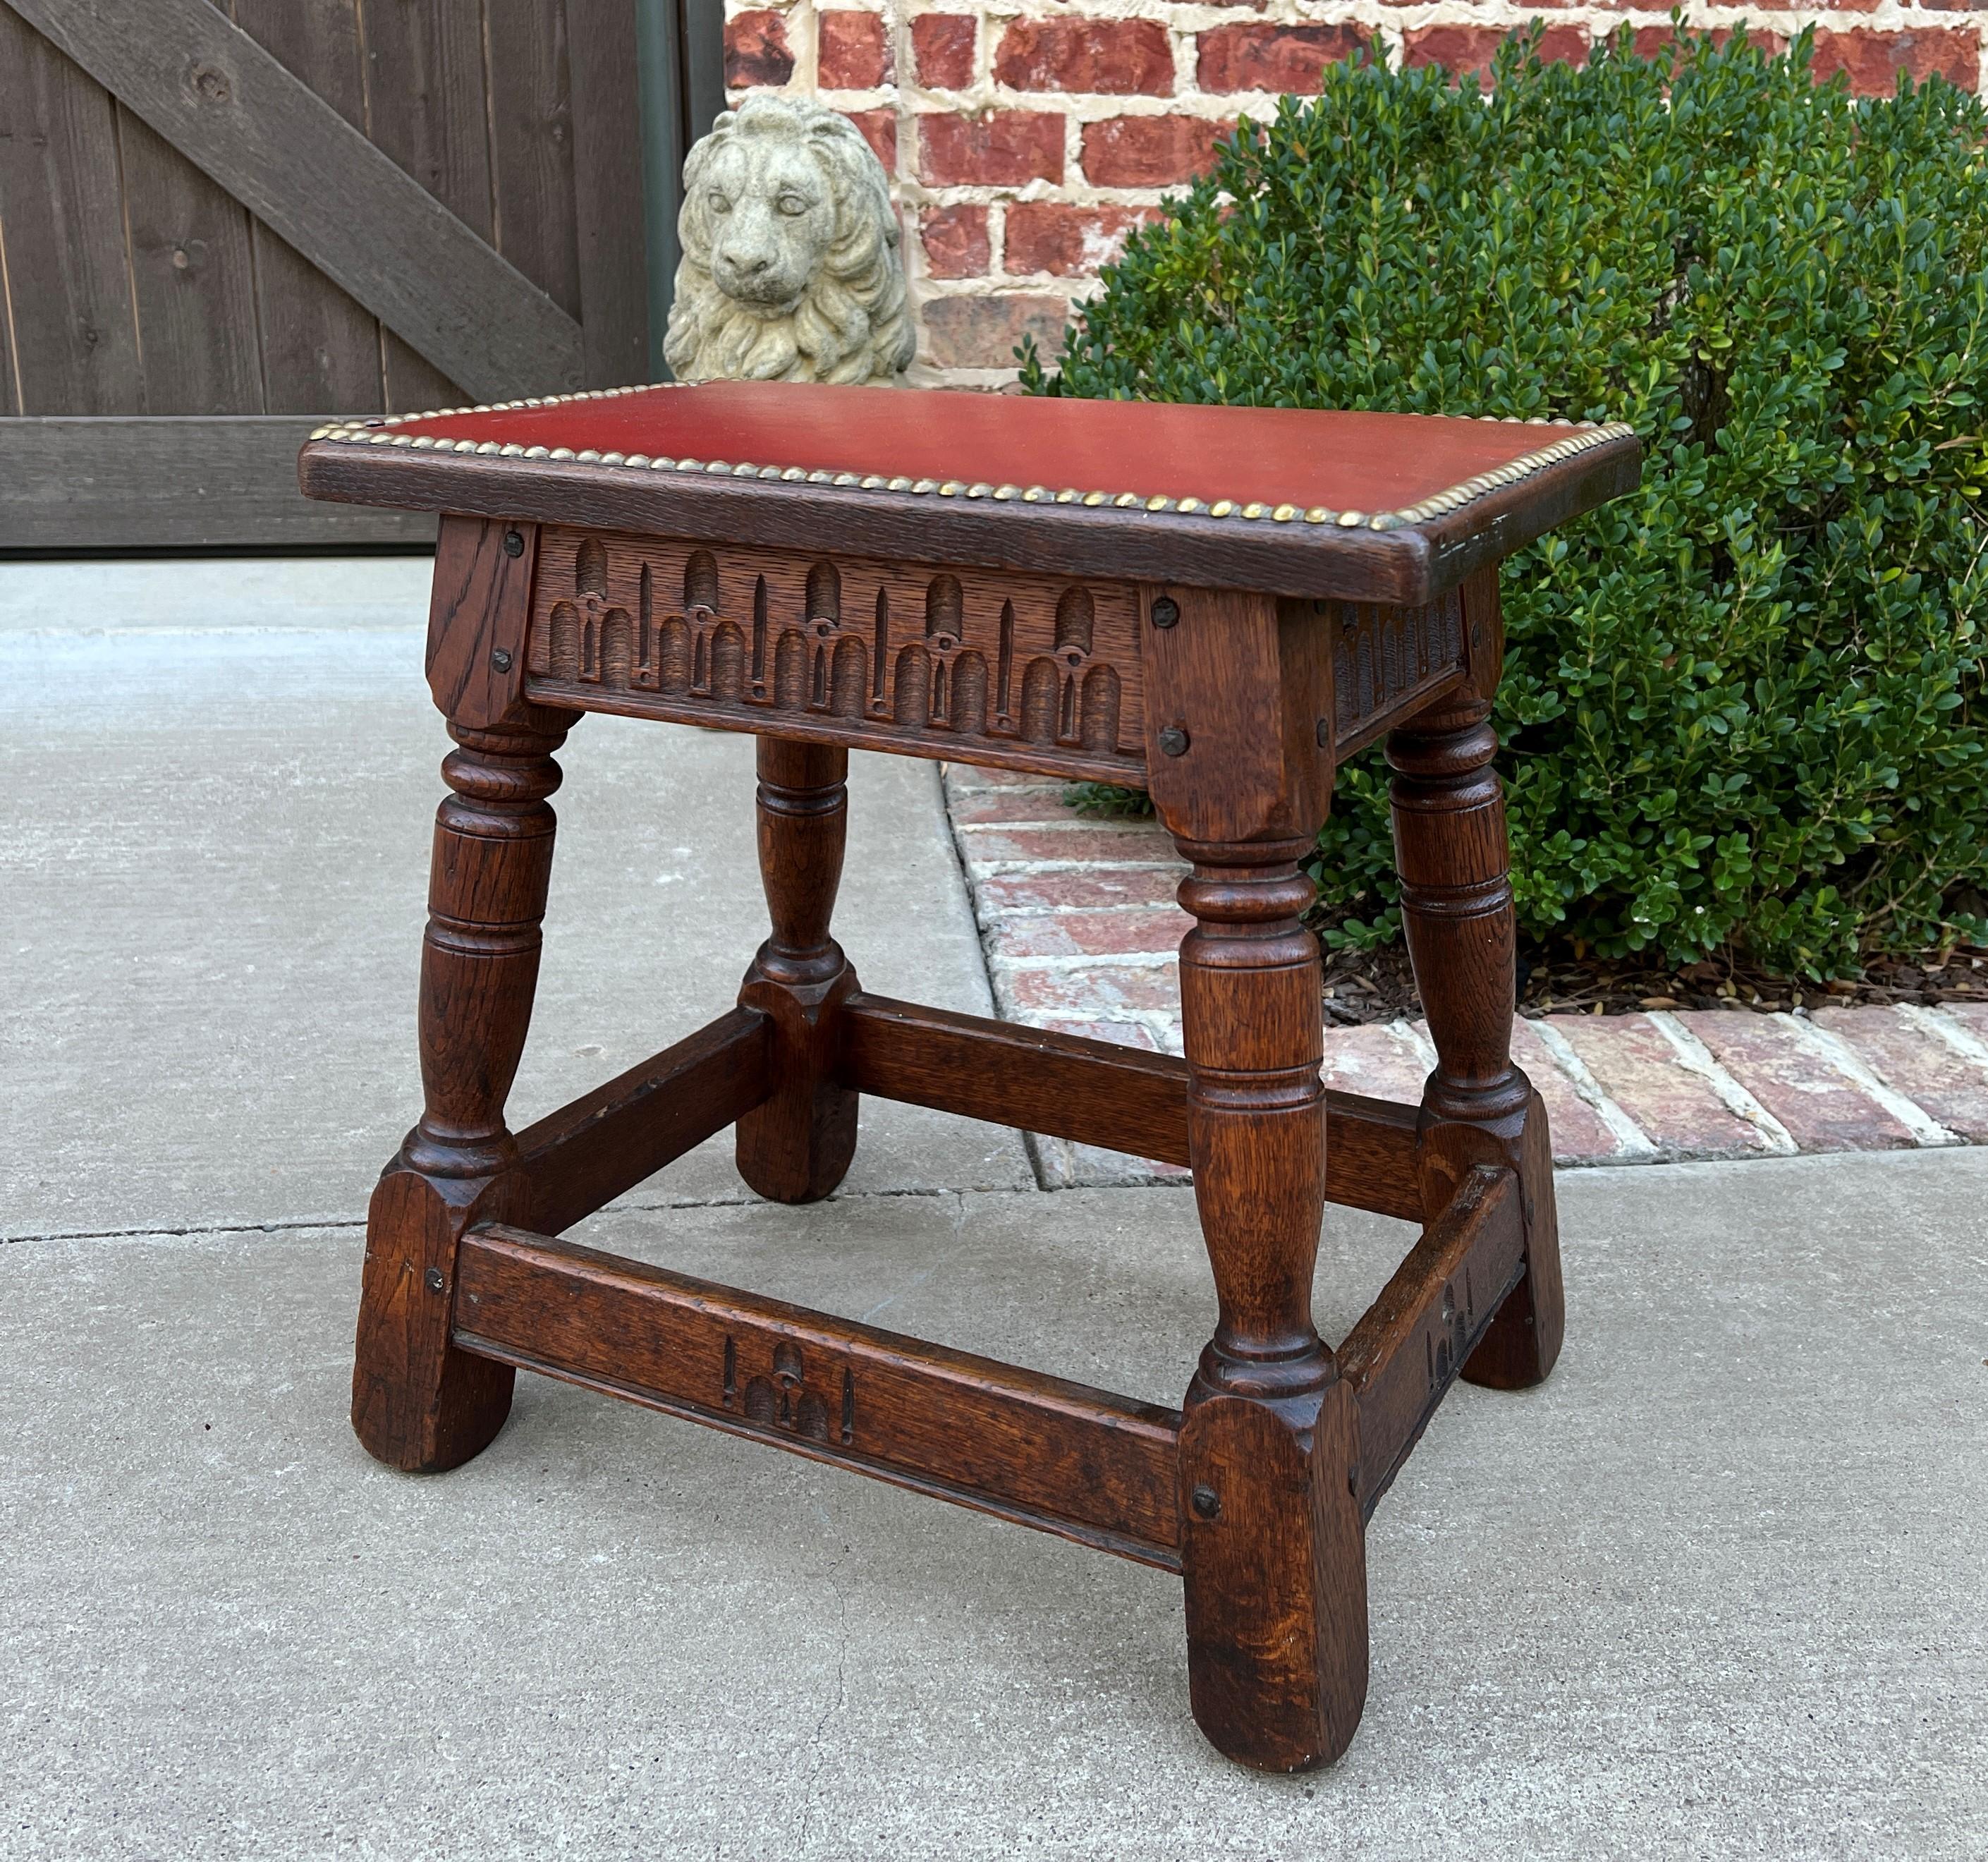 Carved Antique English Foot Stool Small Bench Leather Top Joint Stool Oak Maker's Tag